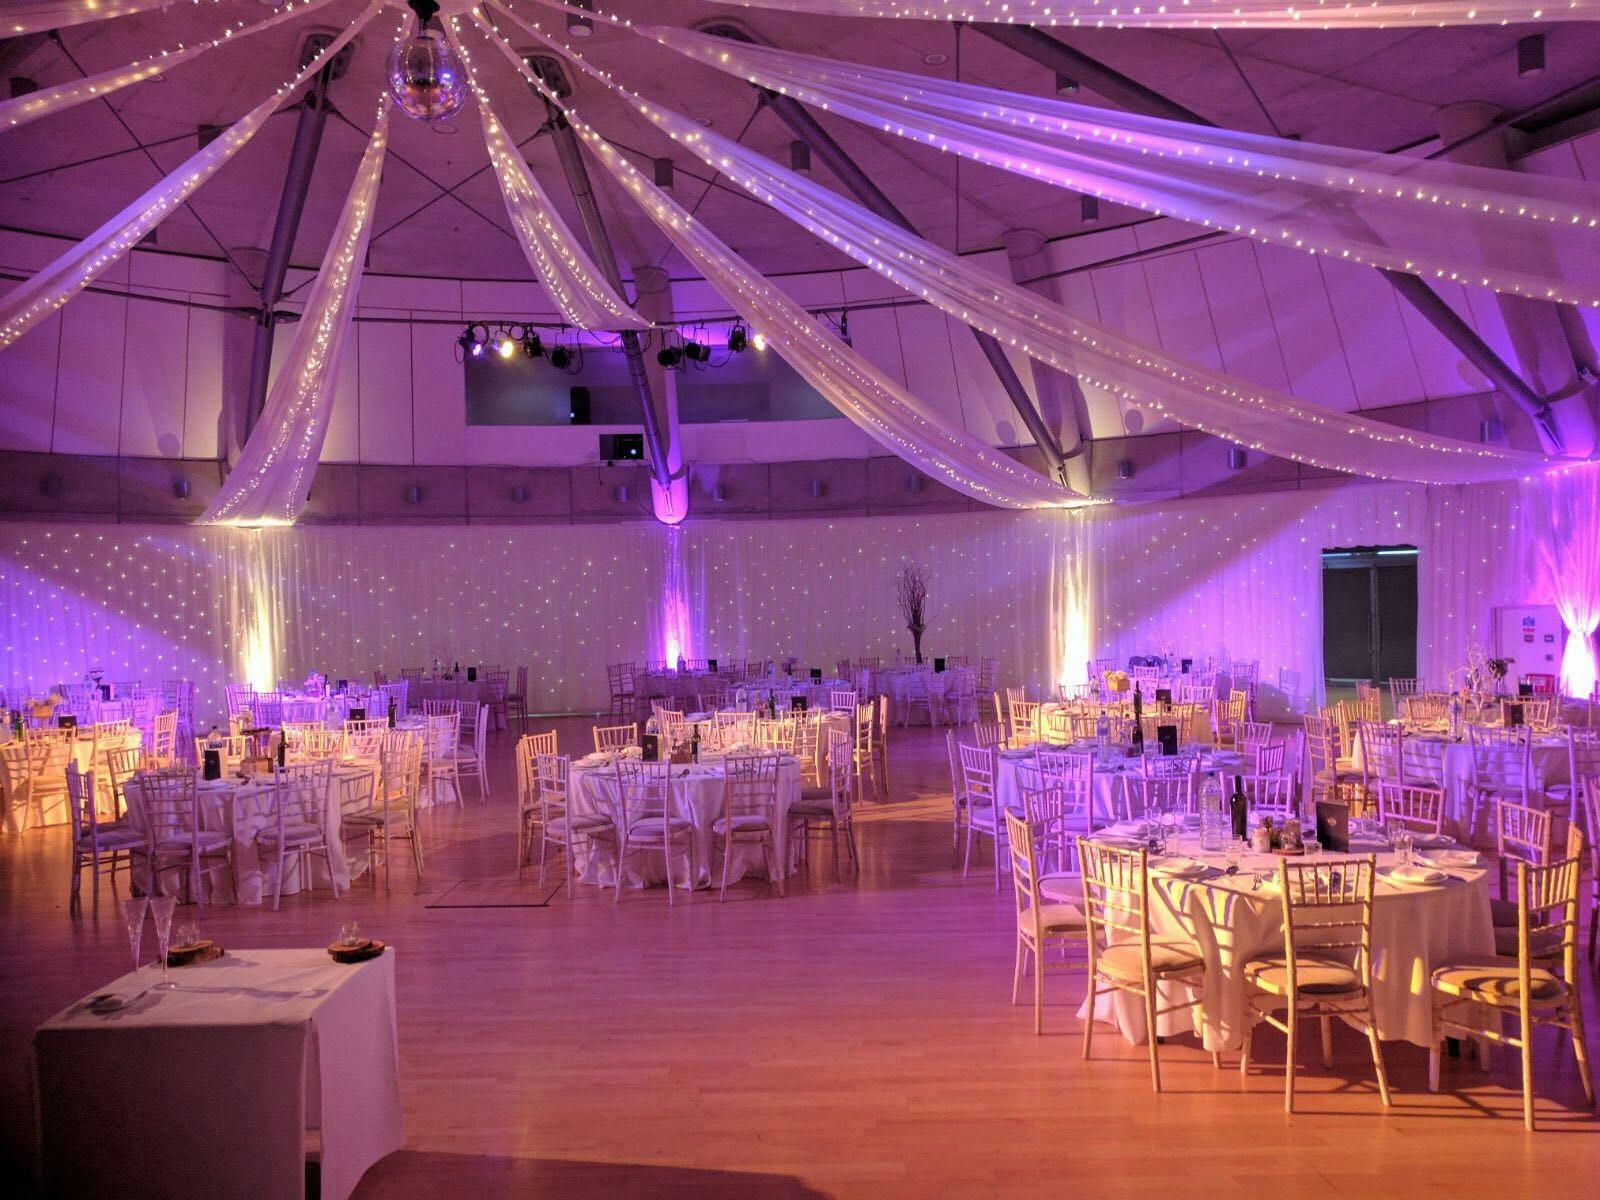 Asian Wedding Venues in London - The Drum at Wembley